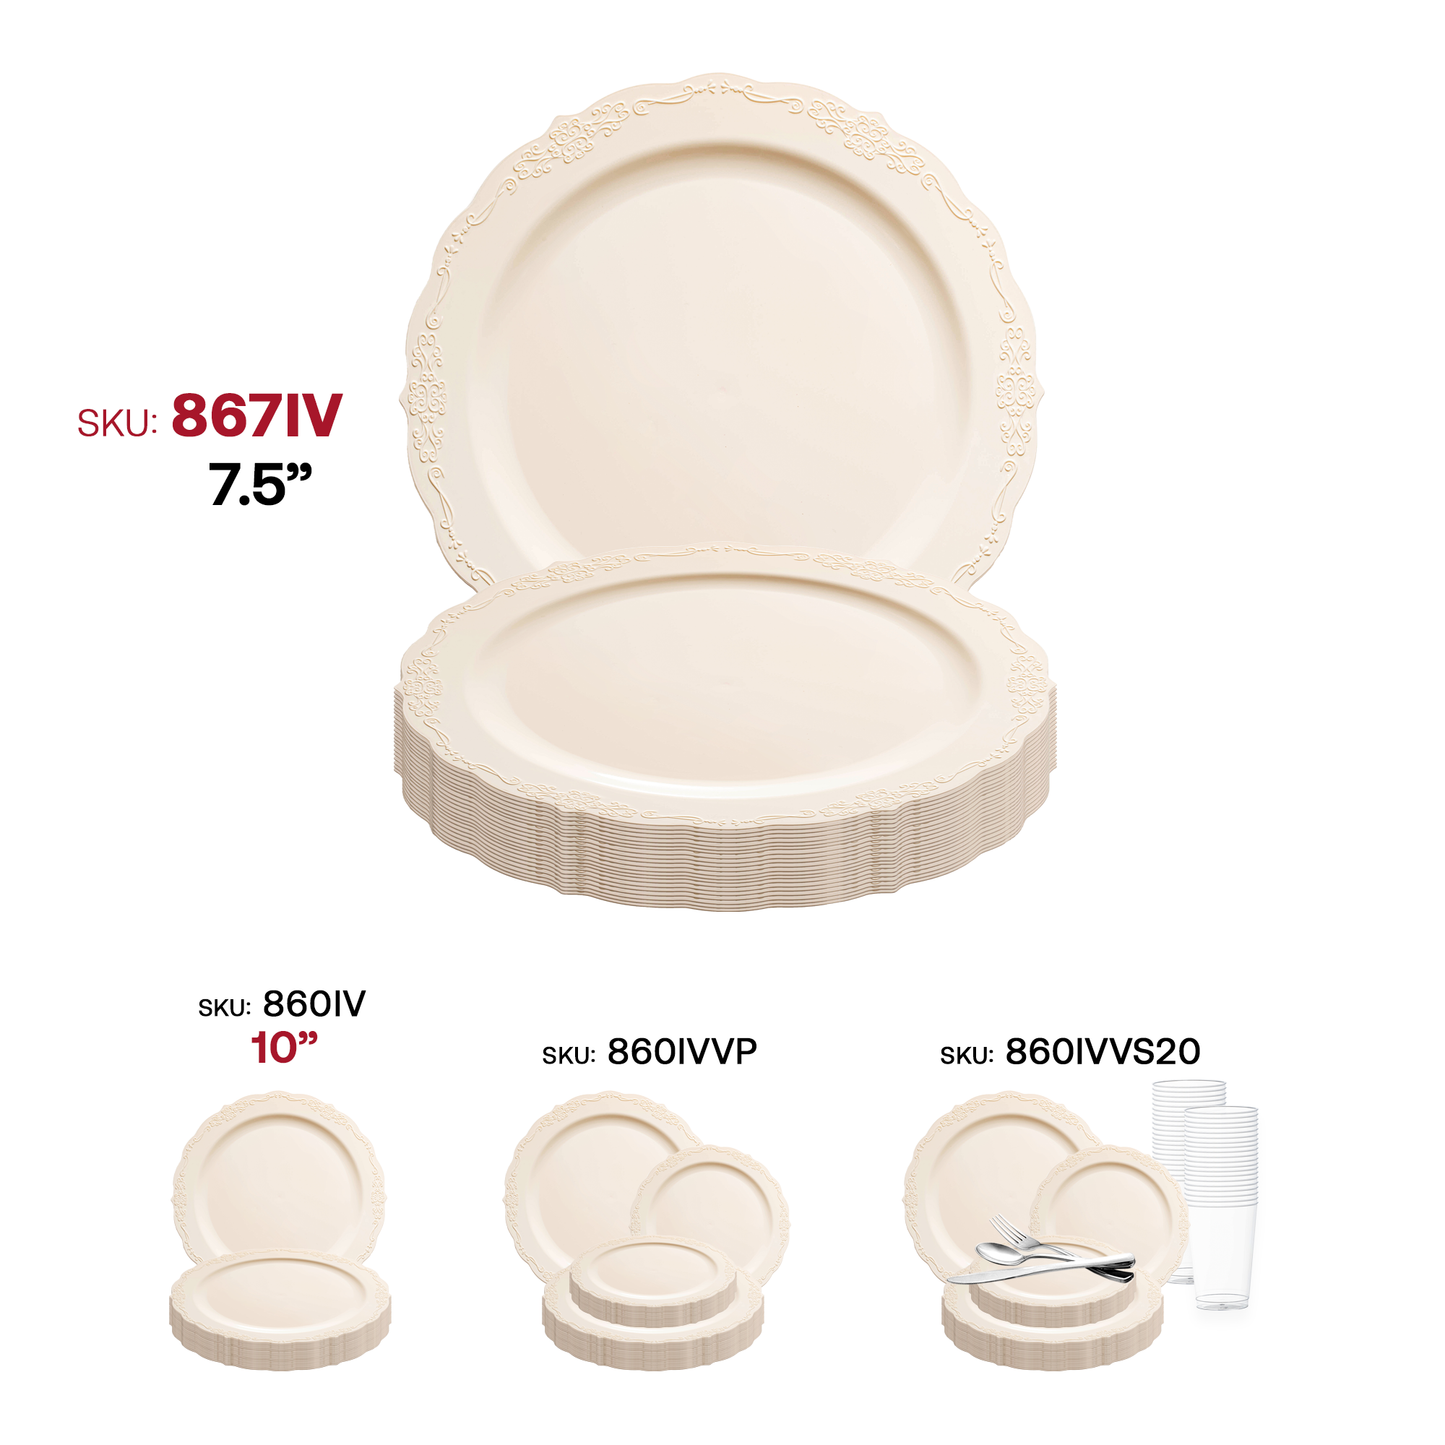 Ivory Vintage Round Disposable Plastic Appetizer/Salad Plates (7.5") SKU | The Kaya Collection